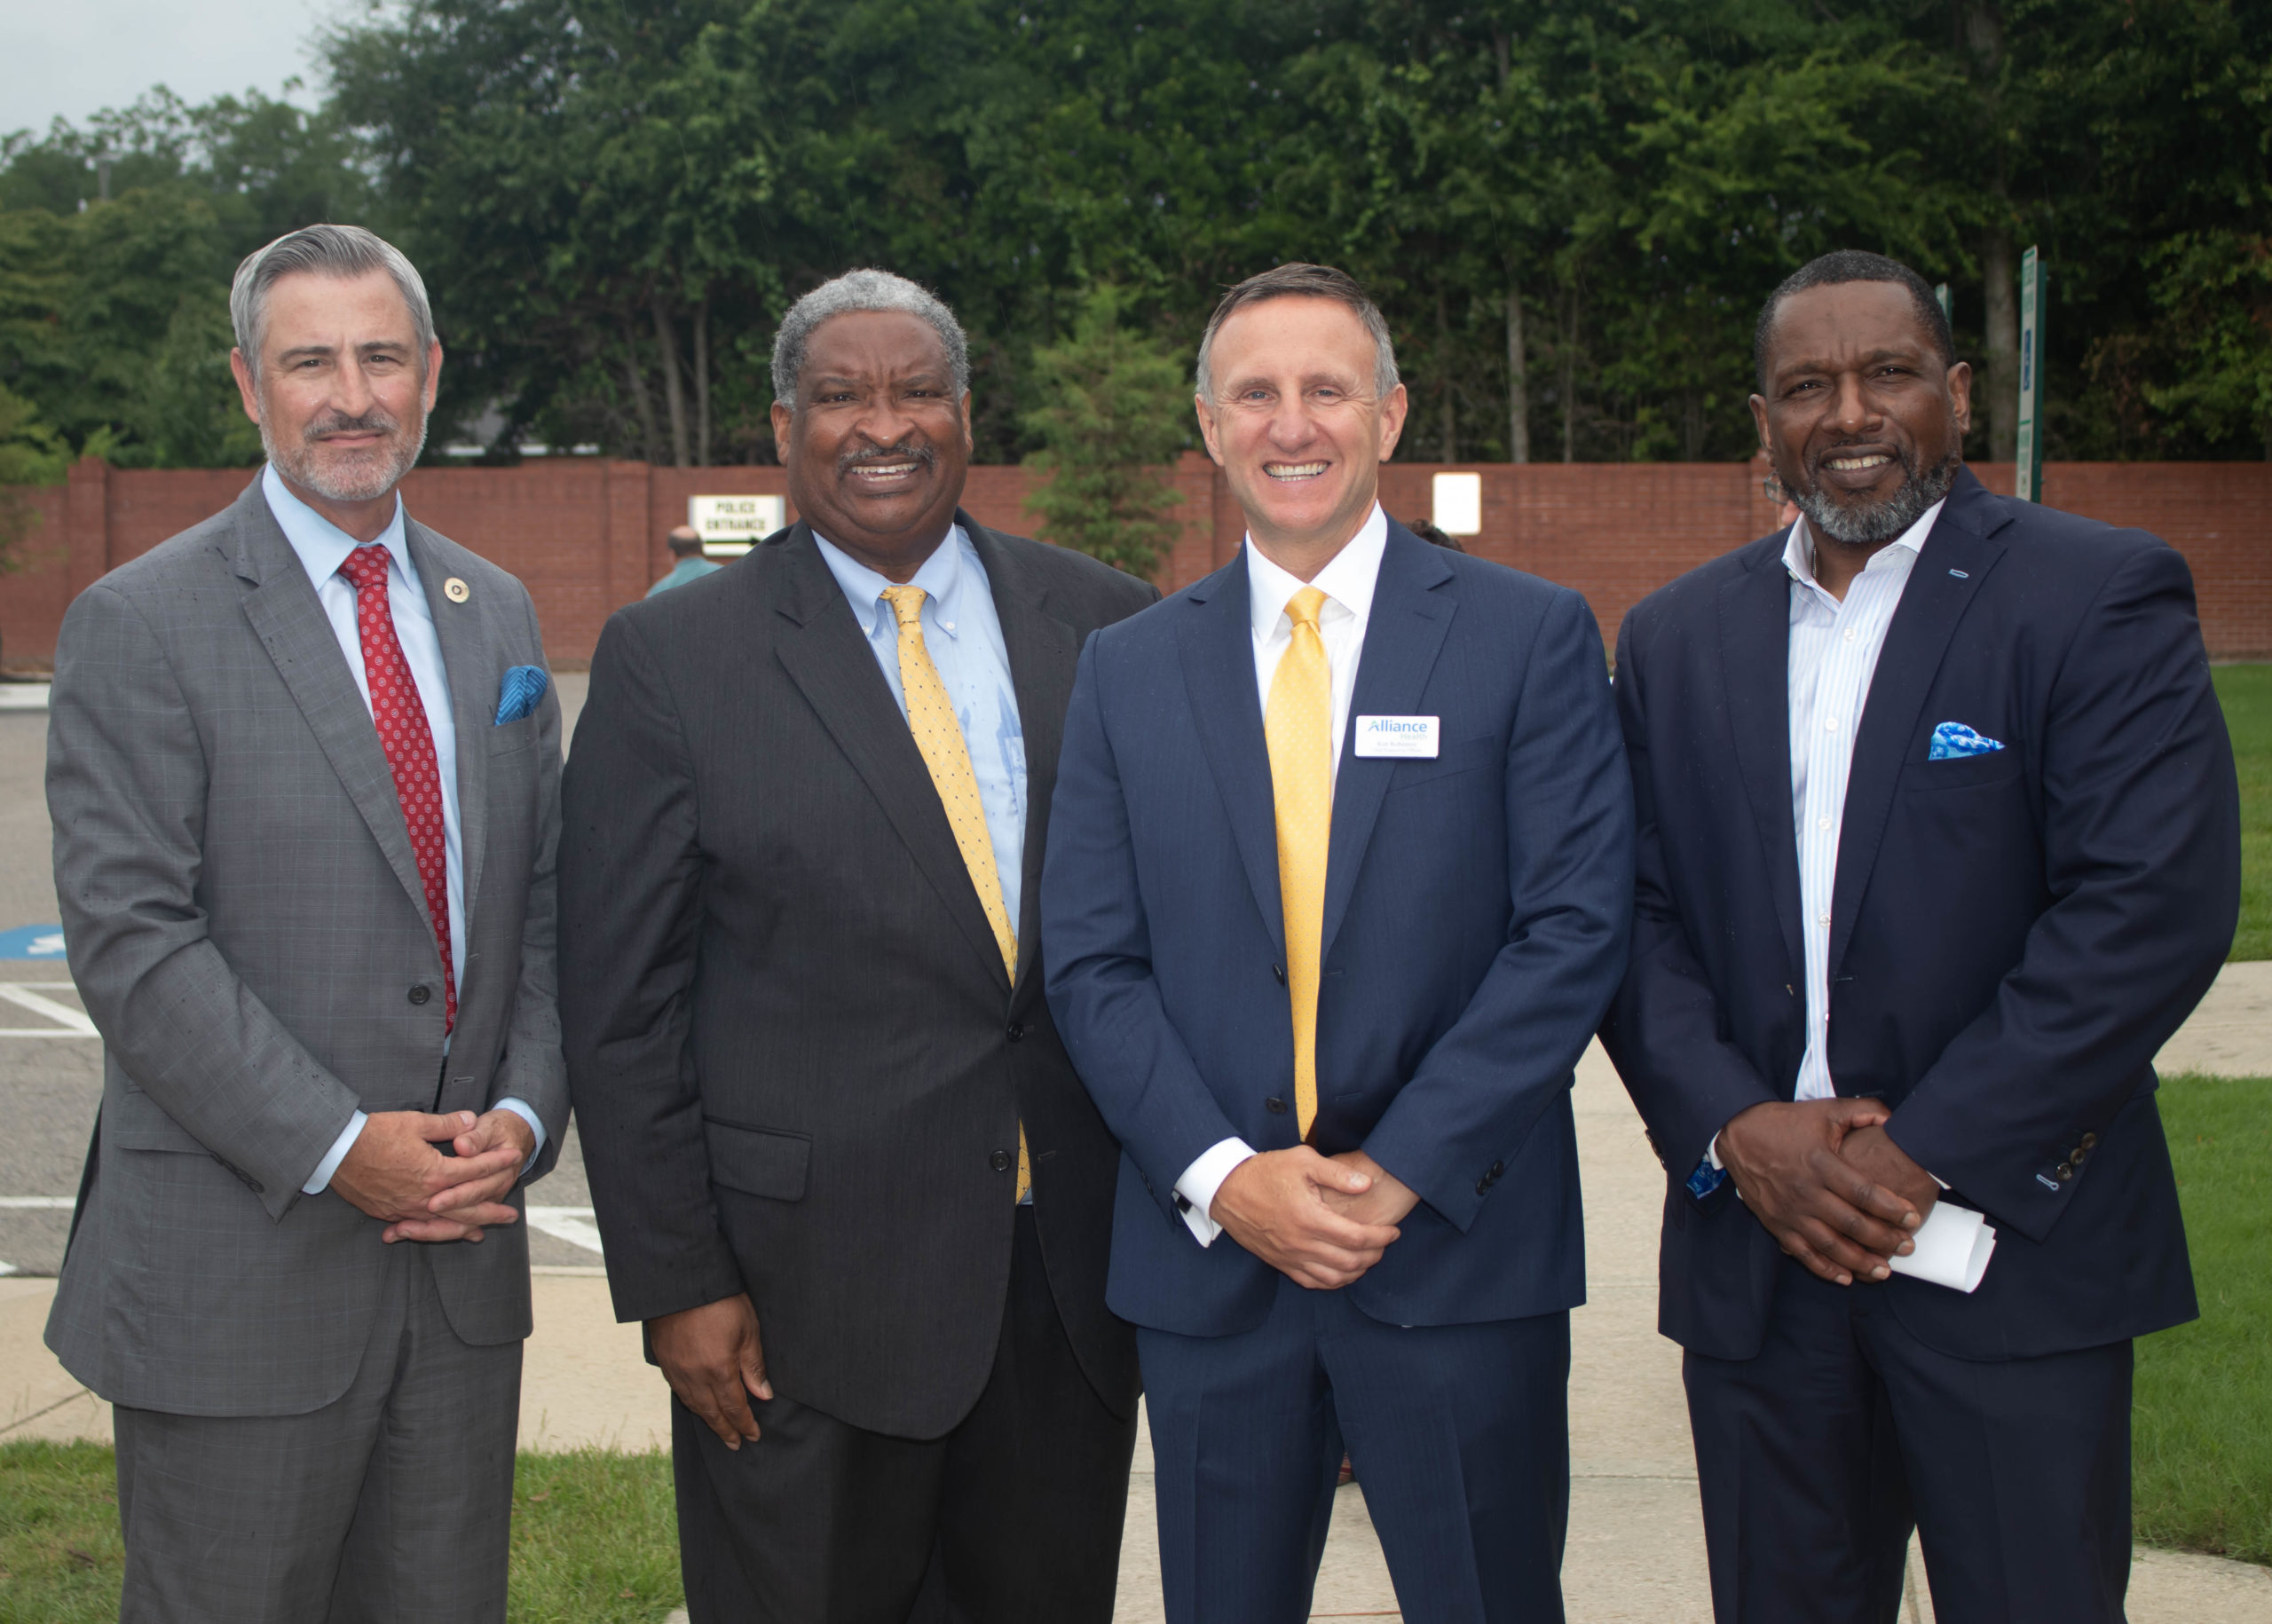 Left to right: District 19 State Sen. Kirk deViere, Cumberland County Board of Commissioners Vice Chairman Glenn Adams, Alliance Health CEO Rob Robinson and N.C. Division of Mental Health Director Victor Armstrong.